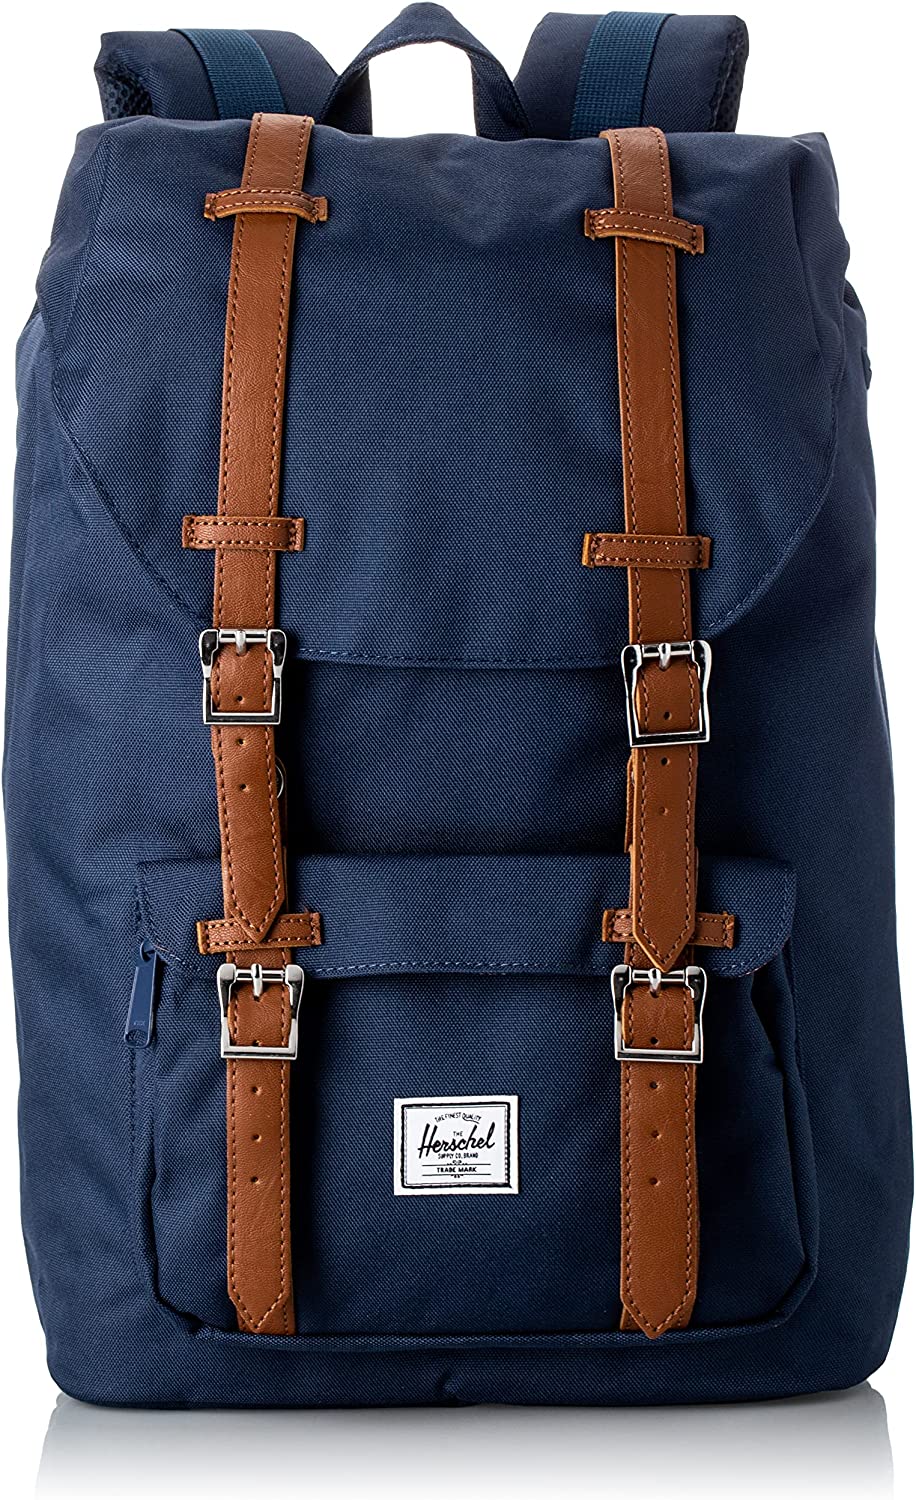 Herschel Little America Laptop Backpack, Navy/Tan Synthetic Leather, Mid-Volume 17.0L